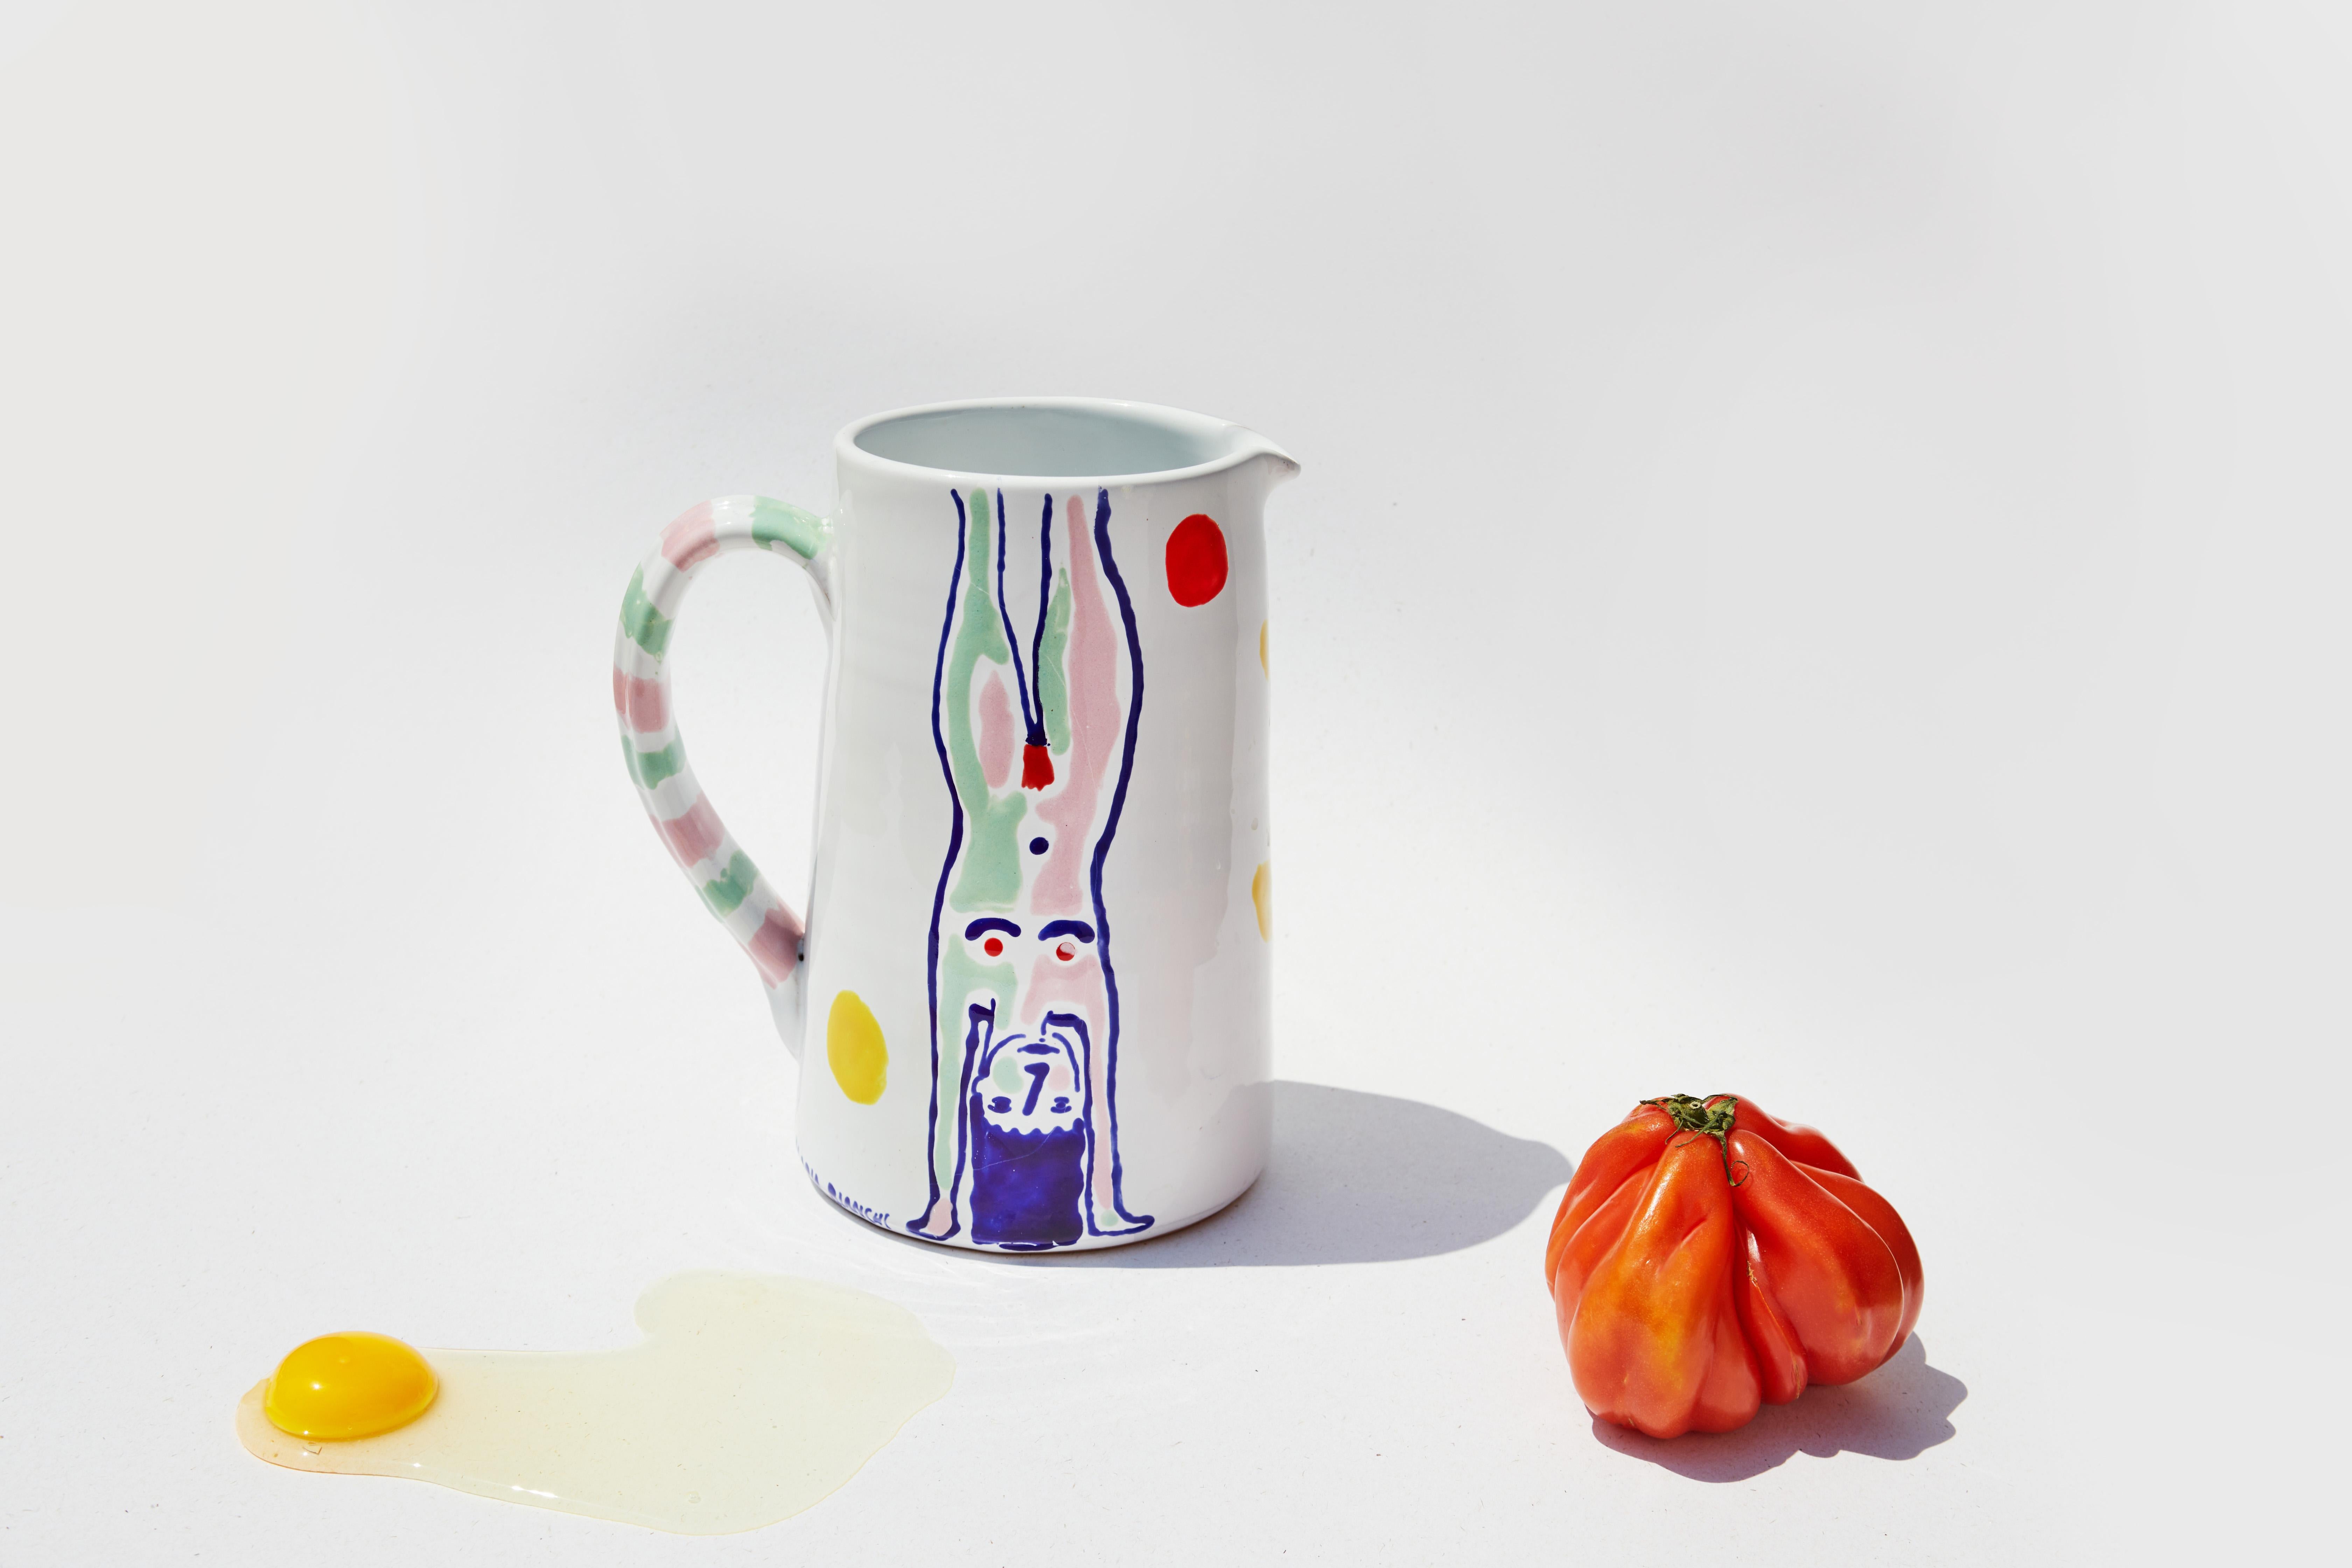 Handmade and Hand glazed Italian Ceramic 
Dishwasher-safe
21x Ø13 cm

This Handcrafted and hand-glazed ceramic jug/vase is made in Grottaglie (Puglia), one of the most acknowledged Italian hubs for ceramics, and it is entirely hand glazed and